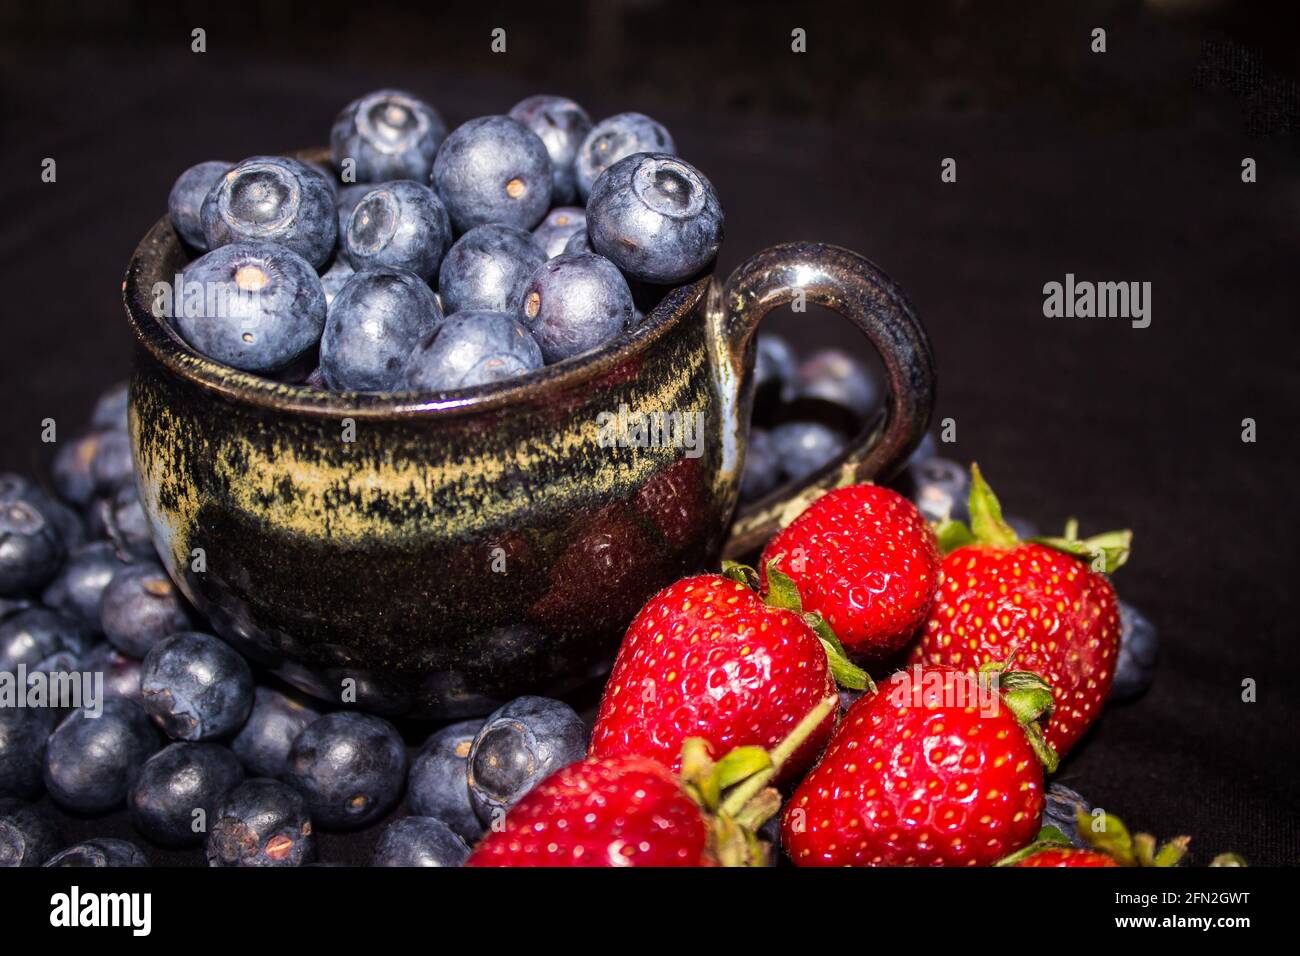 A black pottery teacup, filled to overflowing with blueberries, surrounded by strawberries and more blueberries Stock Photo